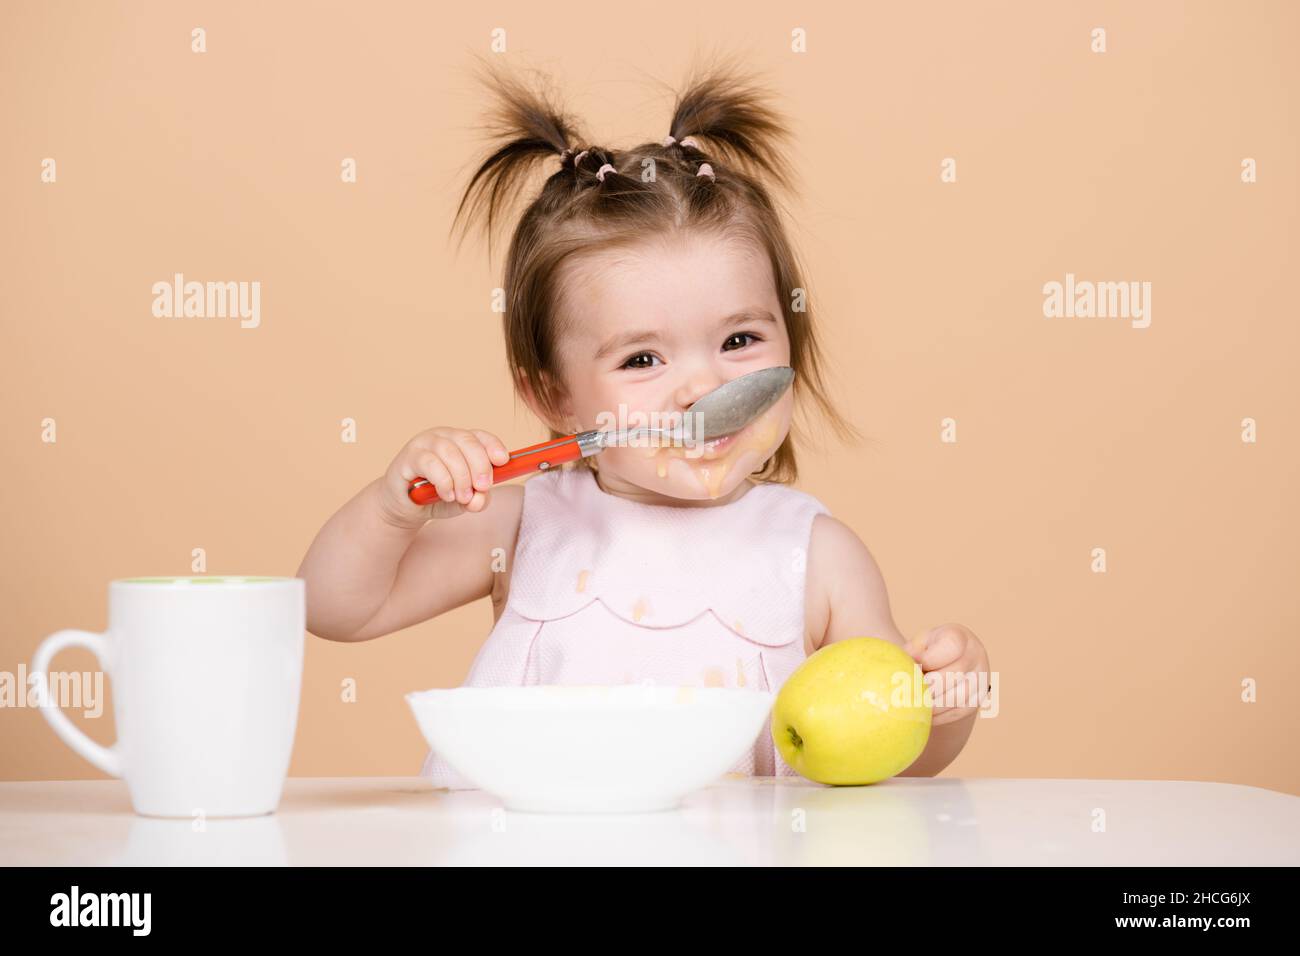 Babies eating, healthy food for a baby. Babys first meal. The child eats on his own with a spoon and plate. Stock Photo